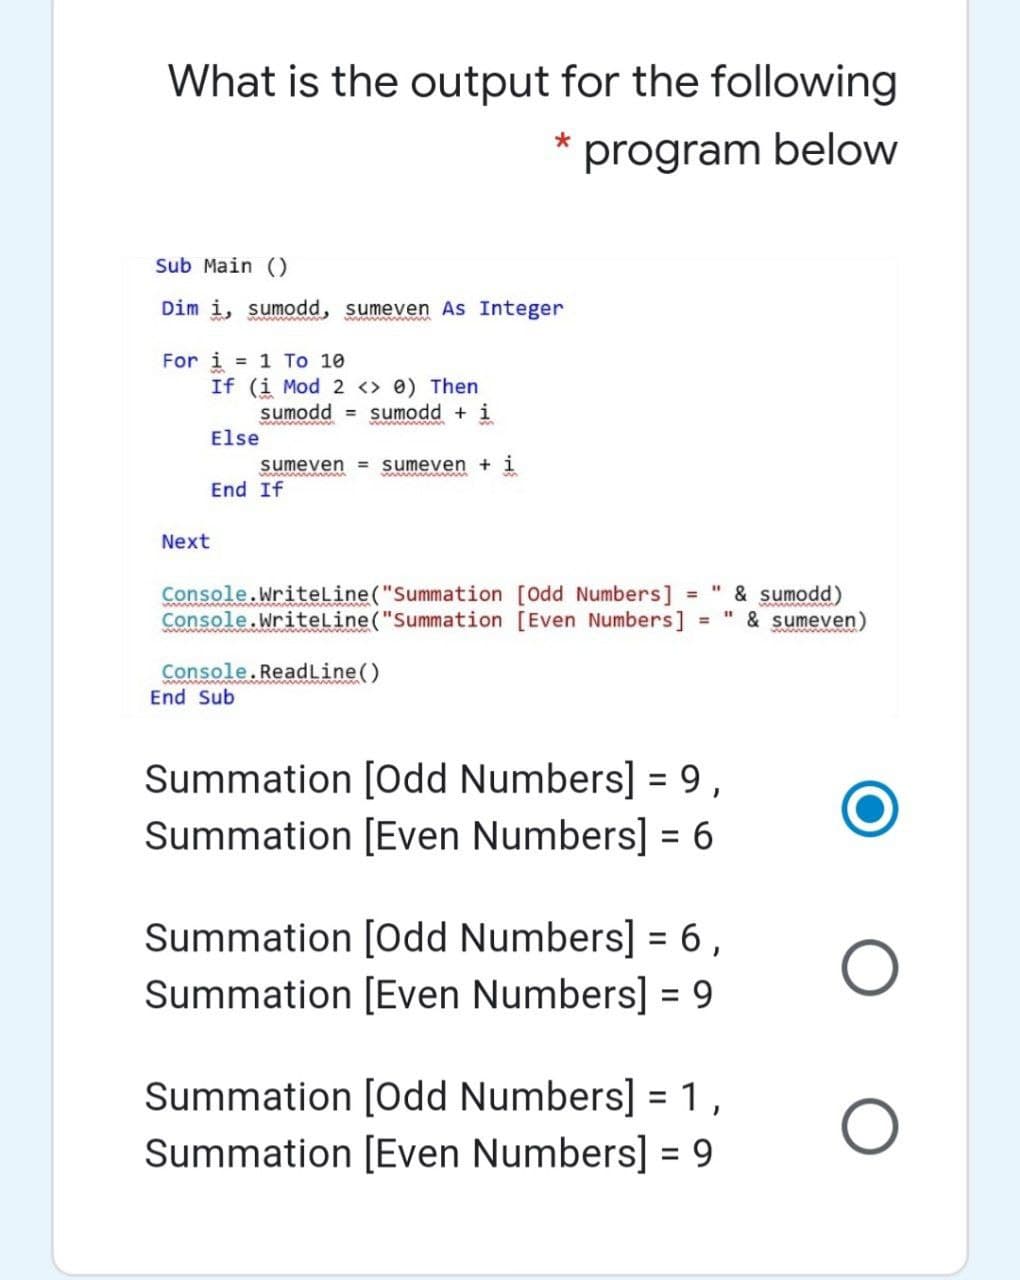 What is the output for the following
program below
Sub Main ()
Dim i, sumodd, sumeven As Integer
For i = 1 To 10
If (i Mod 2 <> 0) Then
sumodd = sumodd + i
Else
sumeven = sumeven + i
End If
Next
Console.WriteLine("Summation [Odd Numbers]
Console.WriteLine("Summation [Even Numbers]
& sumodd)
" & sumeven)
%3D
Console.ReadLine()
End Sub
Summation [Odd Numbers] = 9,
Summation [Even Numbers] = 6
Summation [Odd Numbers] = 6,
Summation [Even Numbers] = 9
%3D
Summation [Odd Numbers] =1,
Summation [Even Numbers] = 9
%3D
